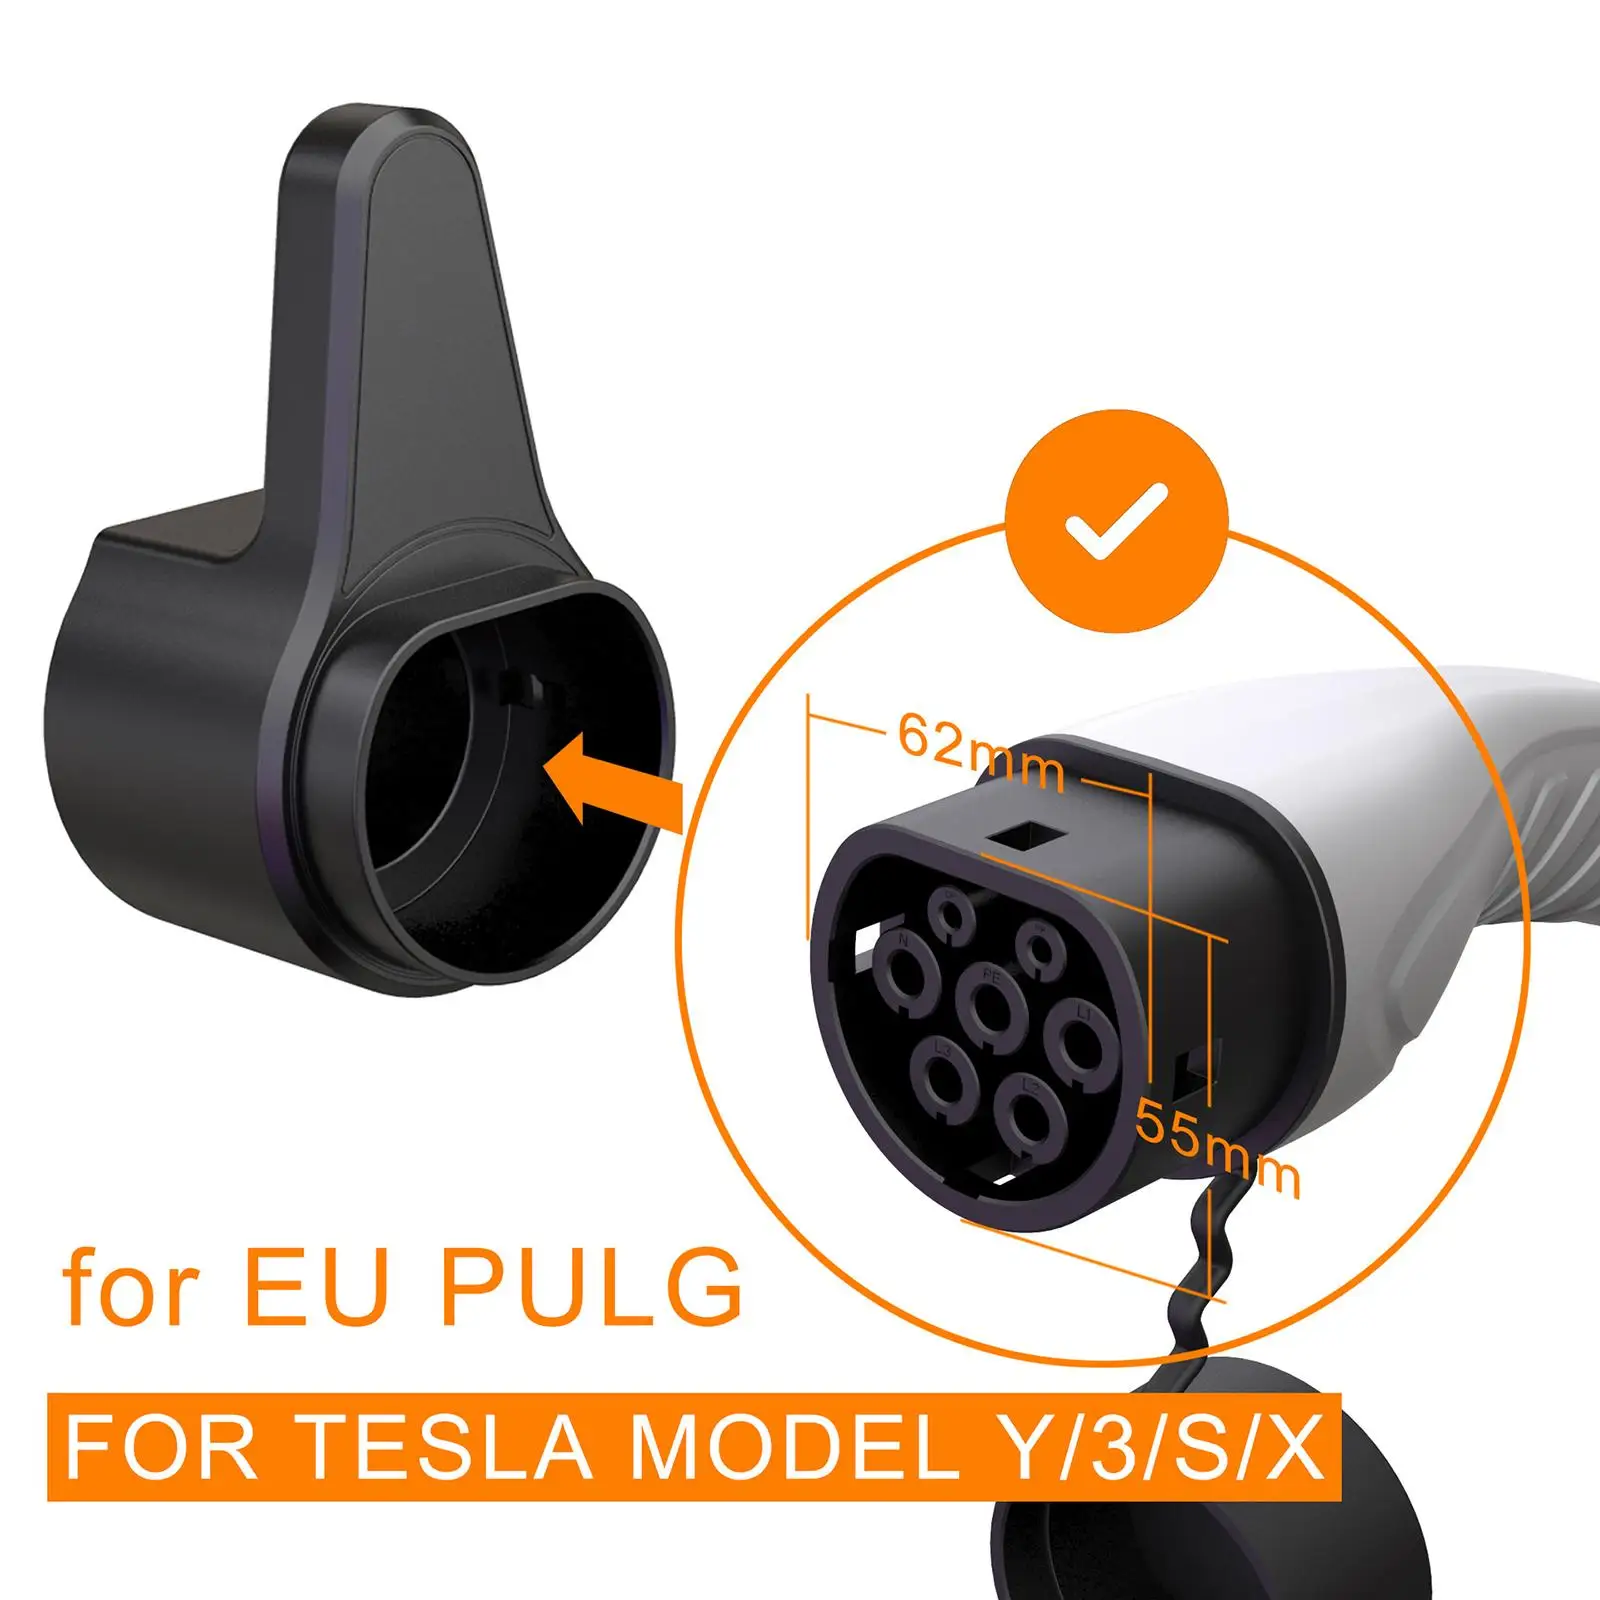 Holder Dock For Electric Vehicle Type 2 Charging Cable Extra Protection Leading Model Y/3/S/X